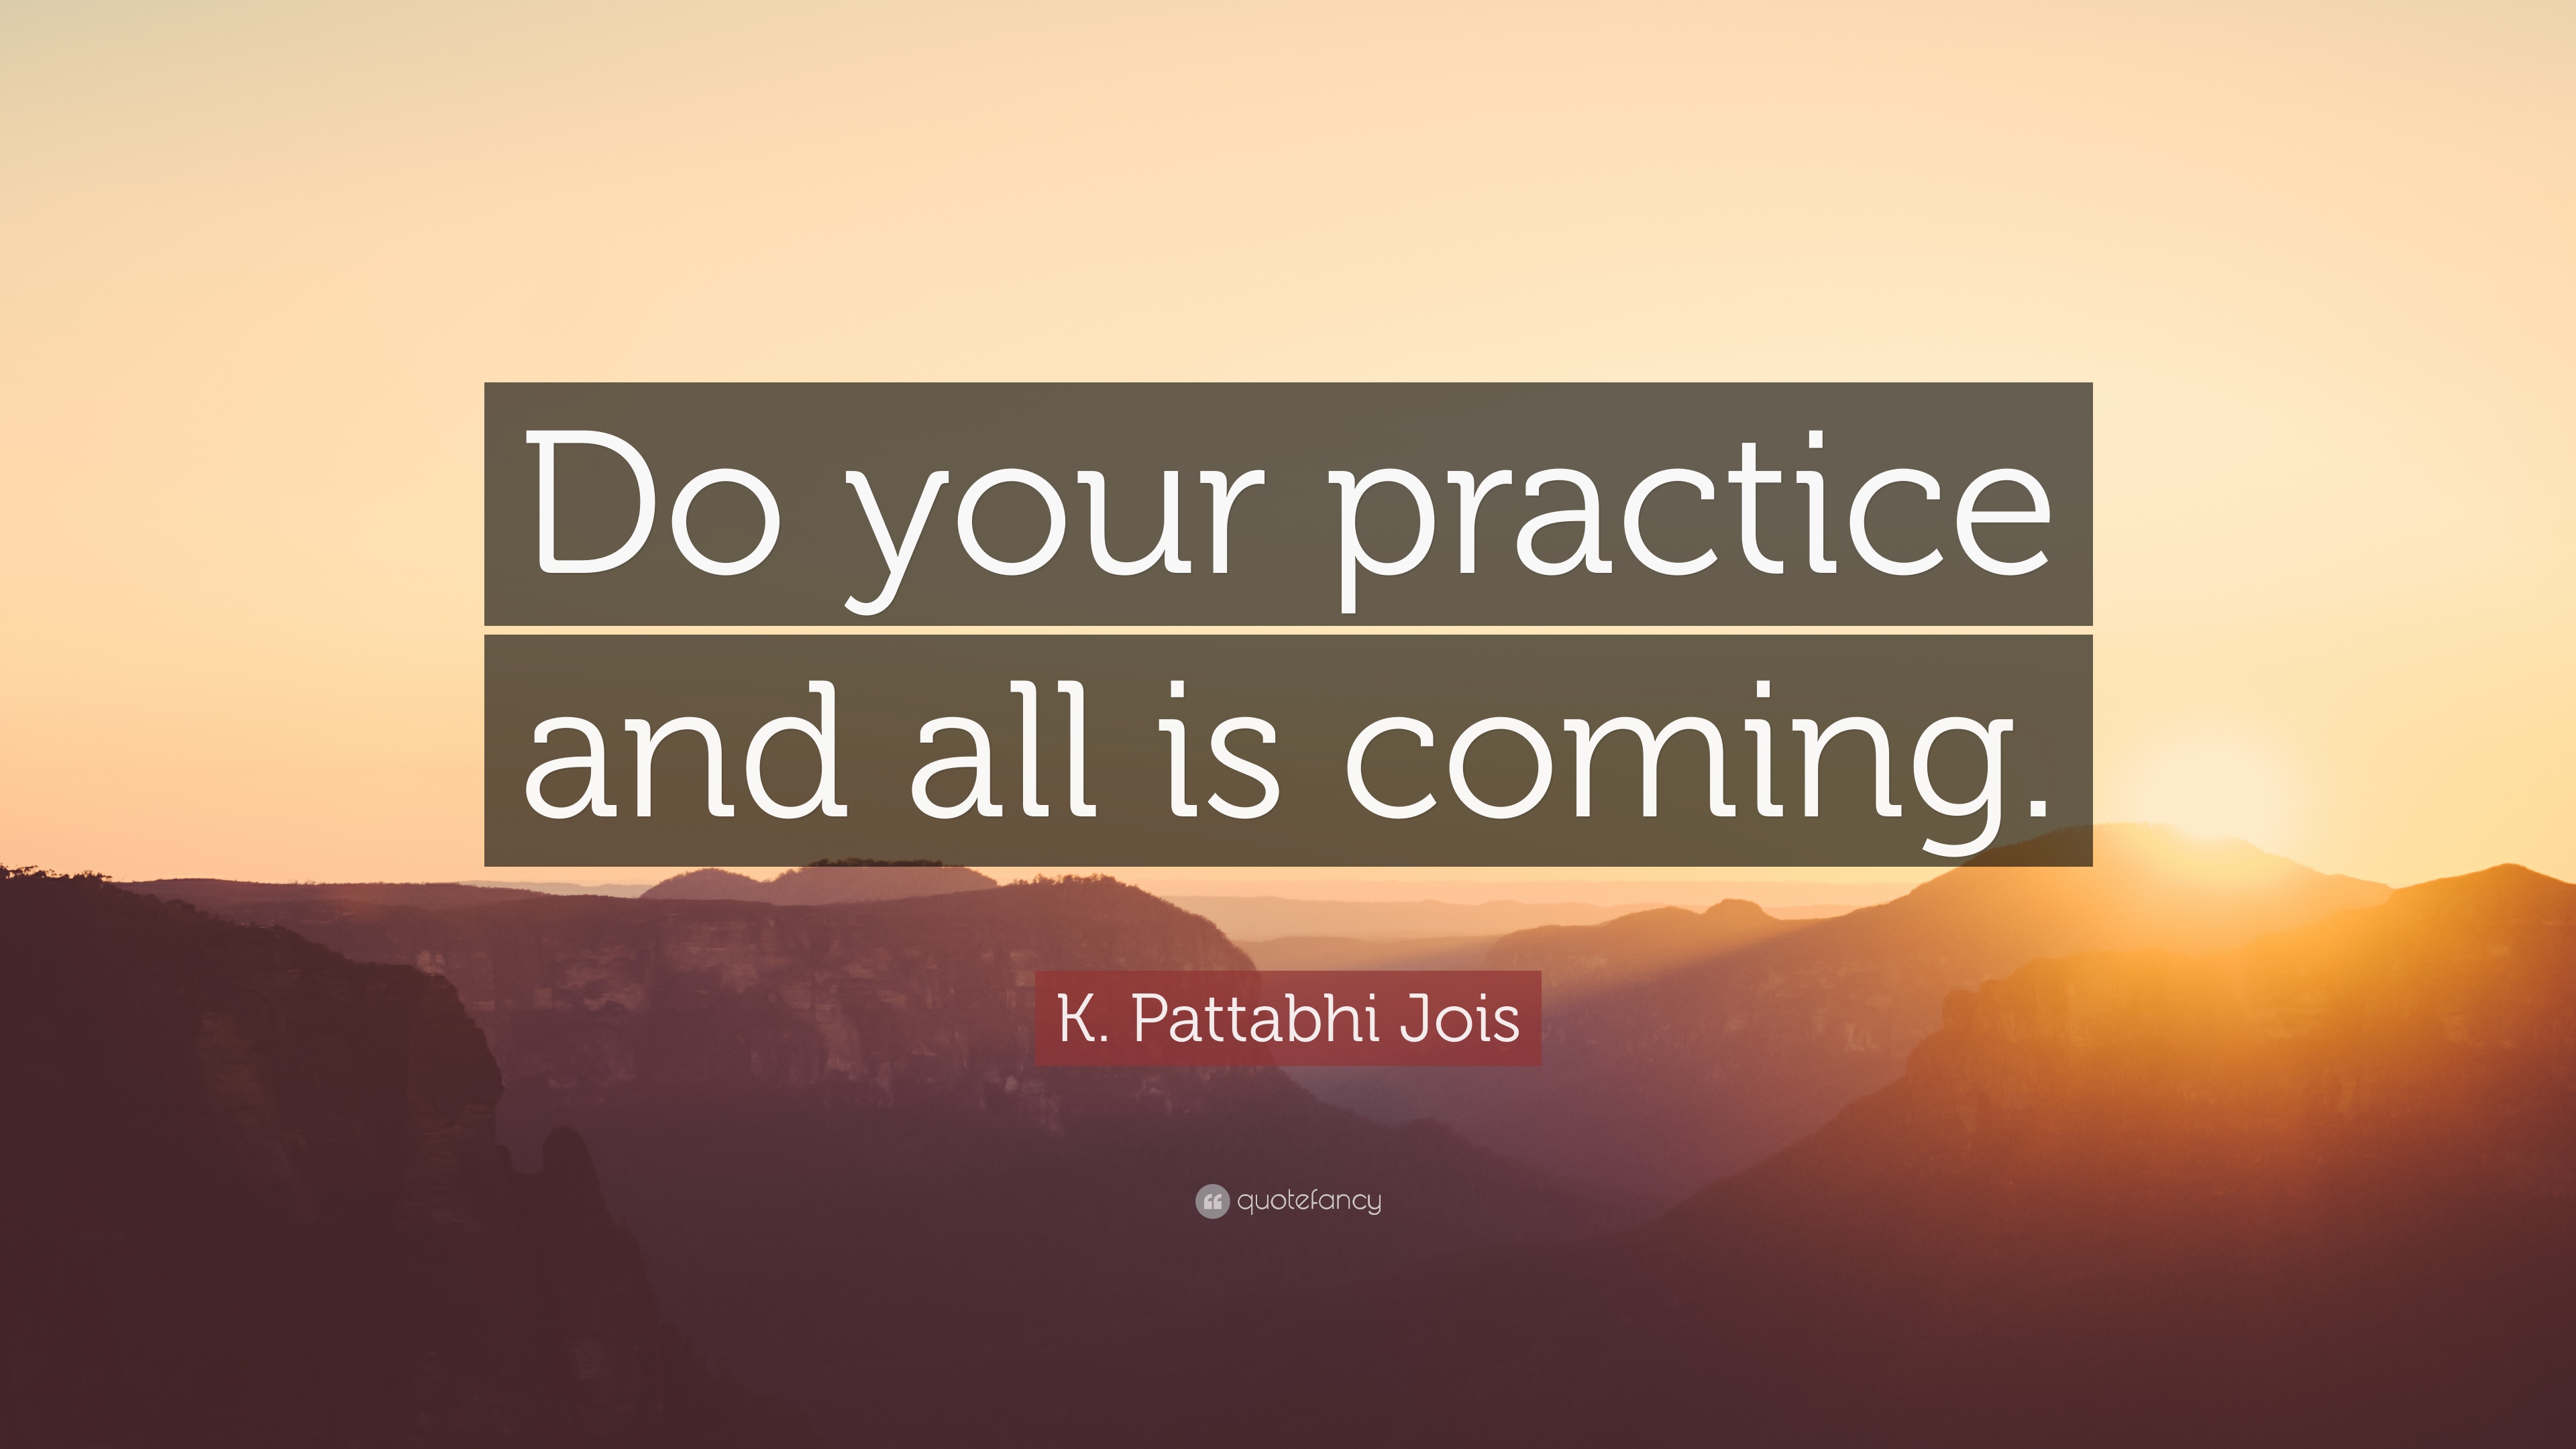 do your practice and all is coming. k. pattabhi jois